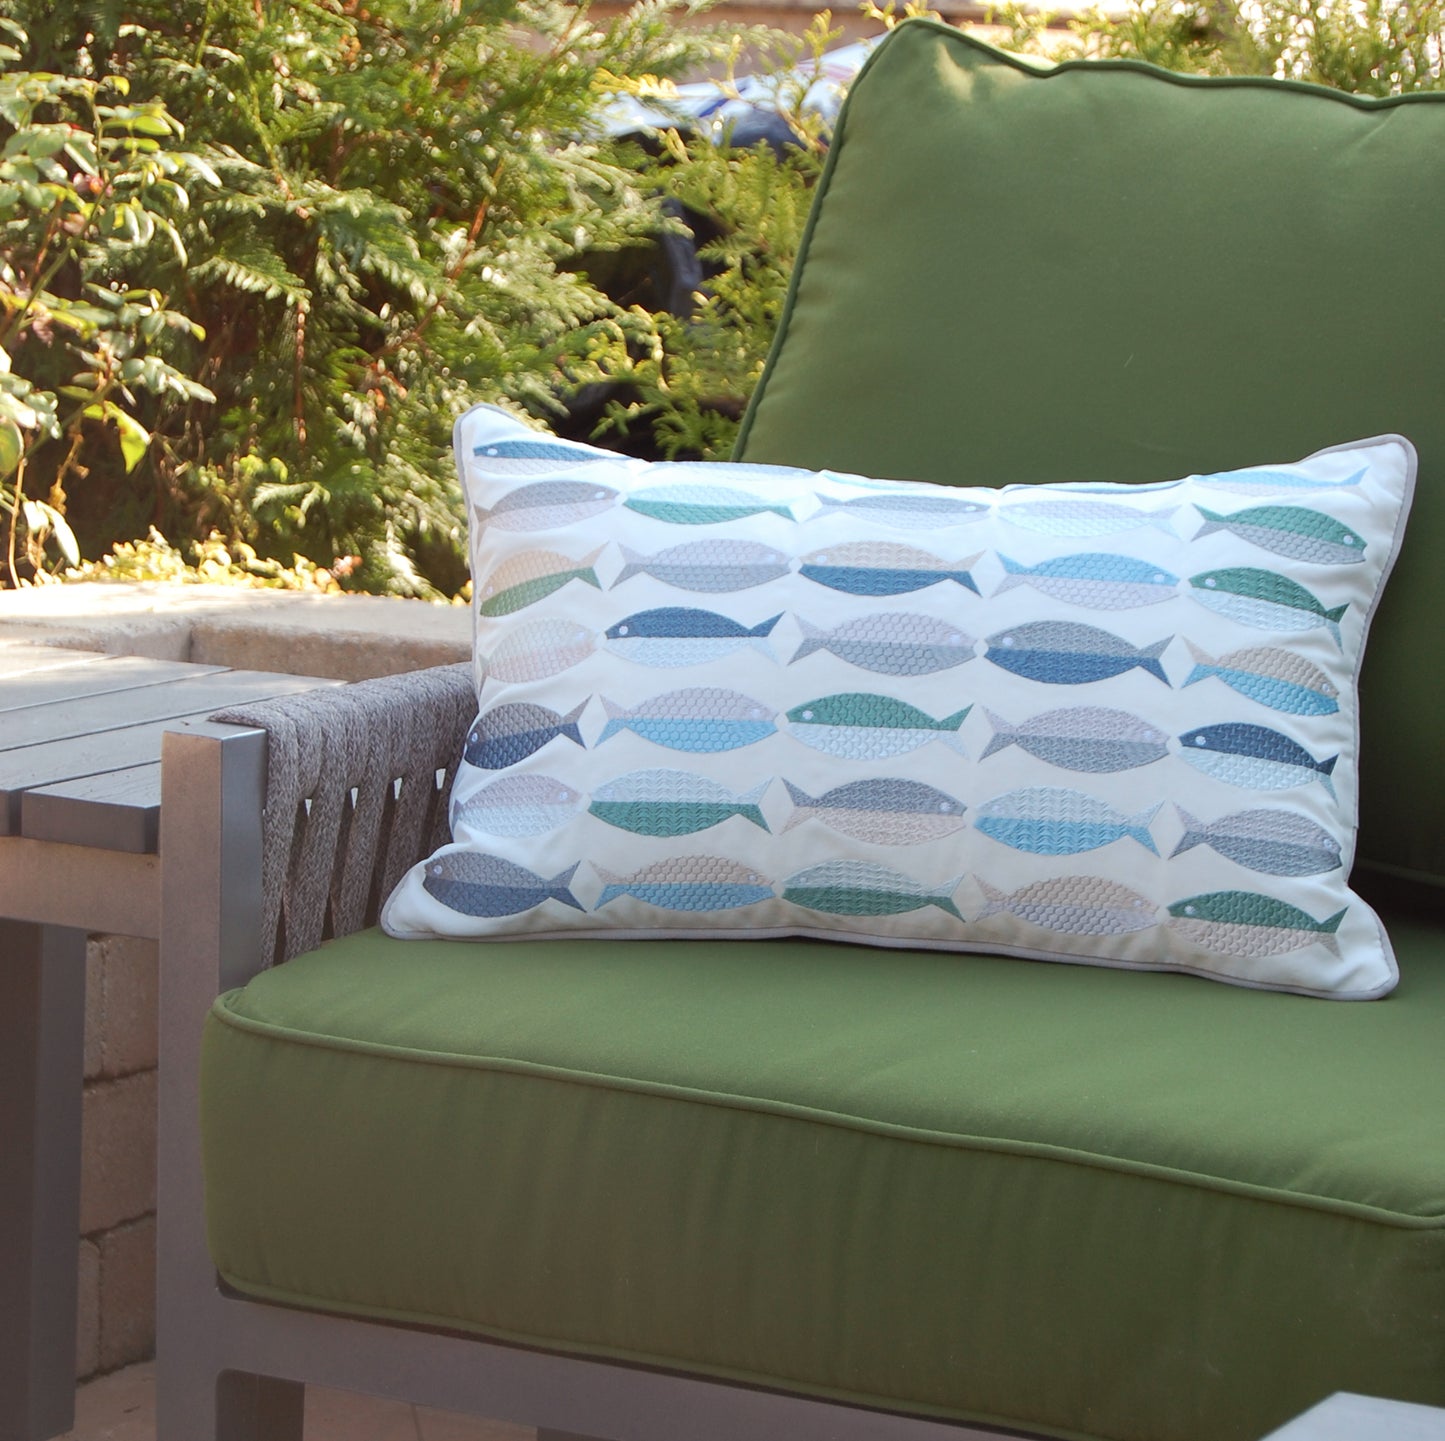 Fish Pattern pillow styled on a green patio couch.